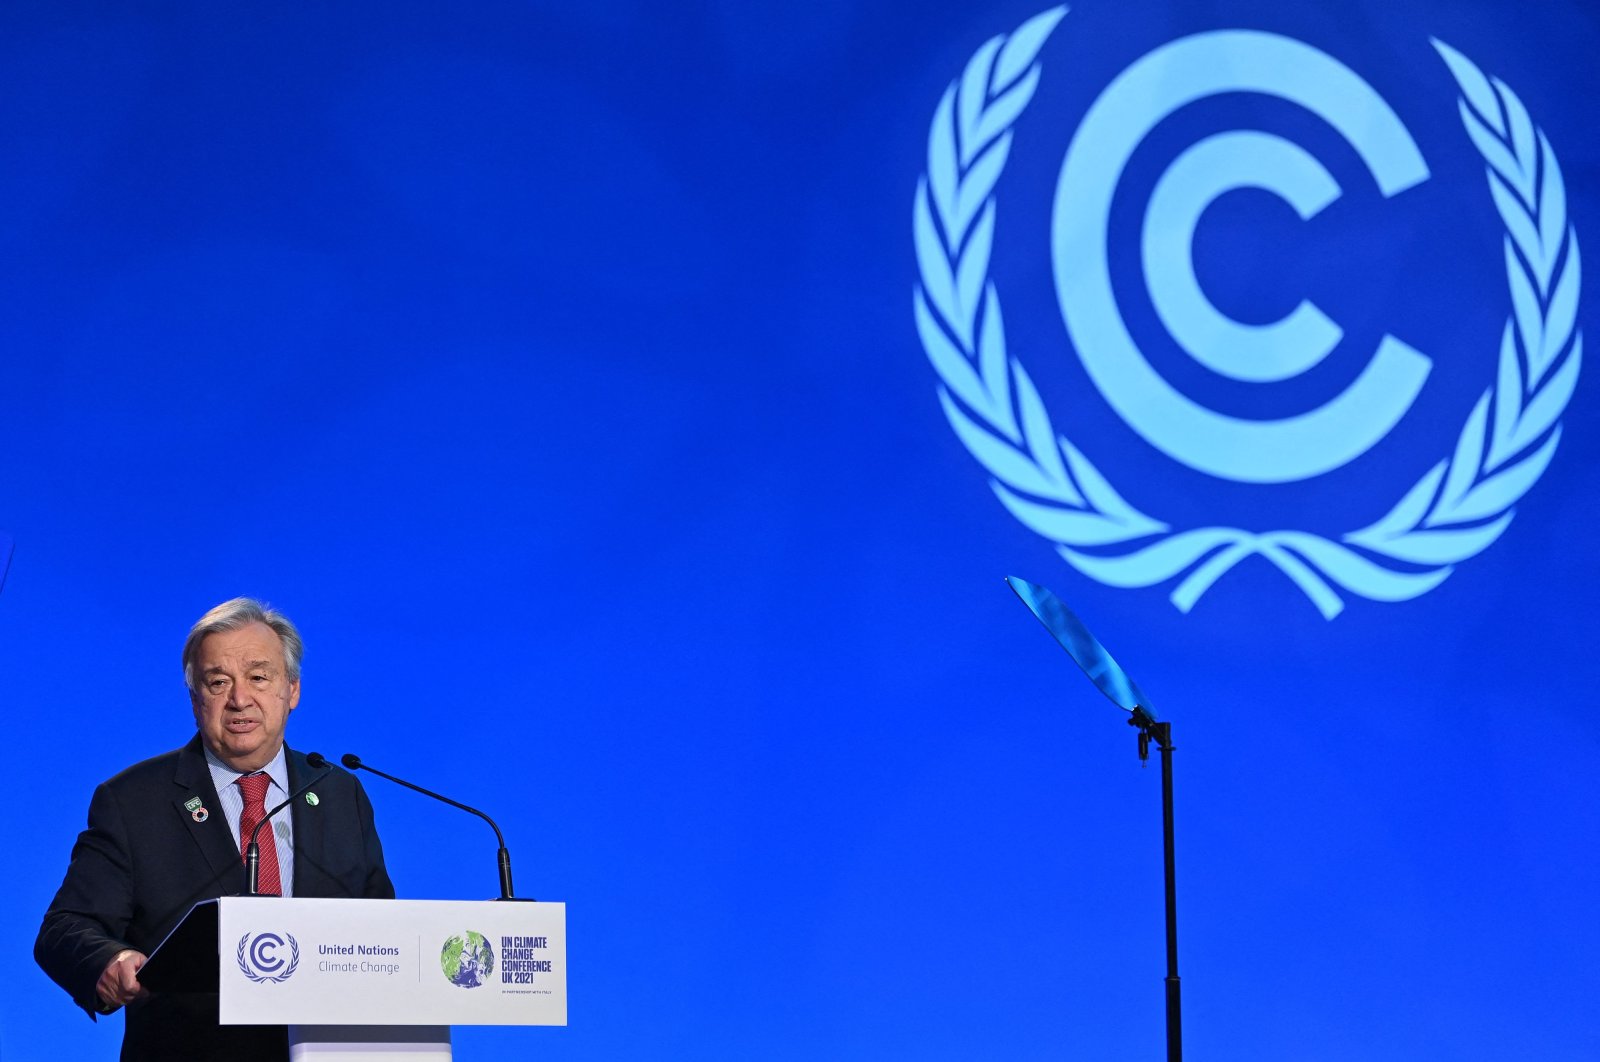 United Nations (UN) Secretary-General Antonio Guterres speaks during a plenary session at the COP26 U.N. Climate Change Conference in Glasgow, Scotland, Nov. 11, 2021. (AFP Photo)